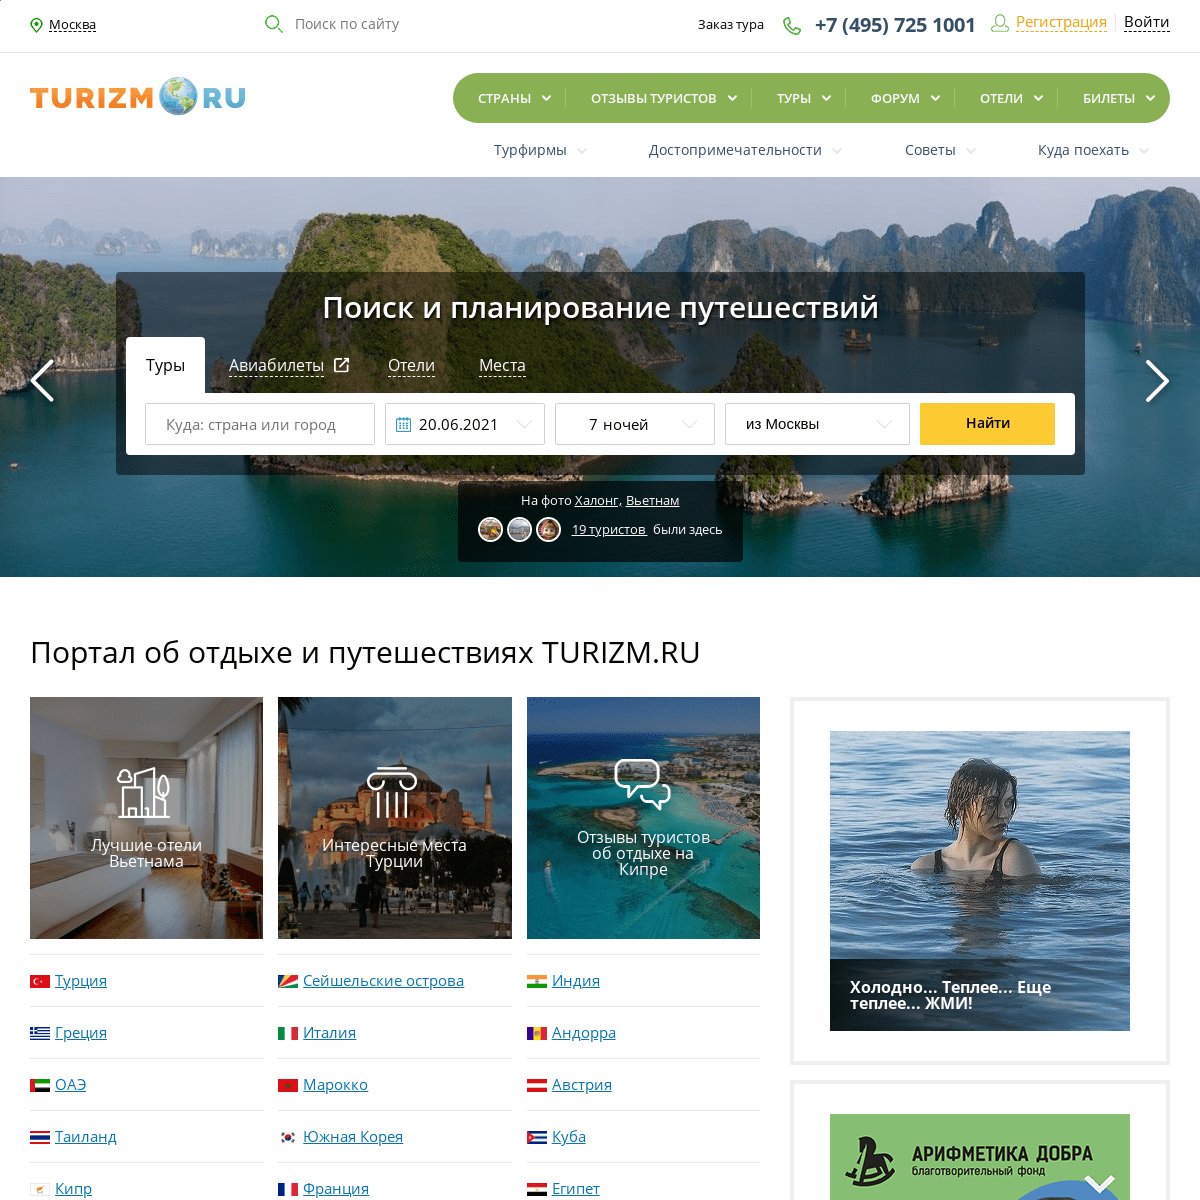 A complete backup of https://turizm.ru